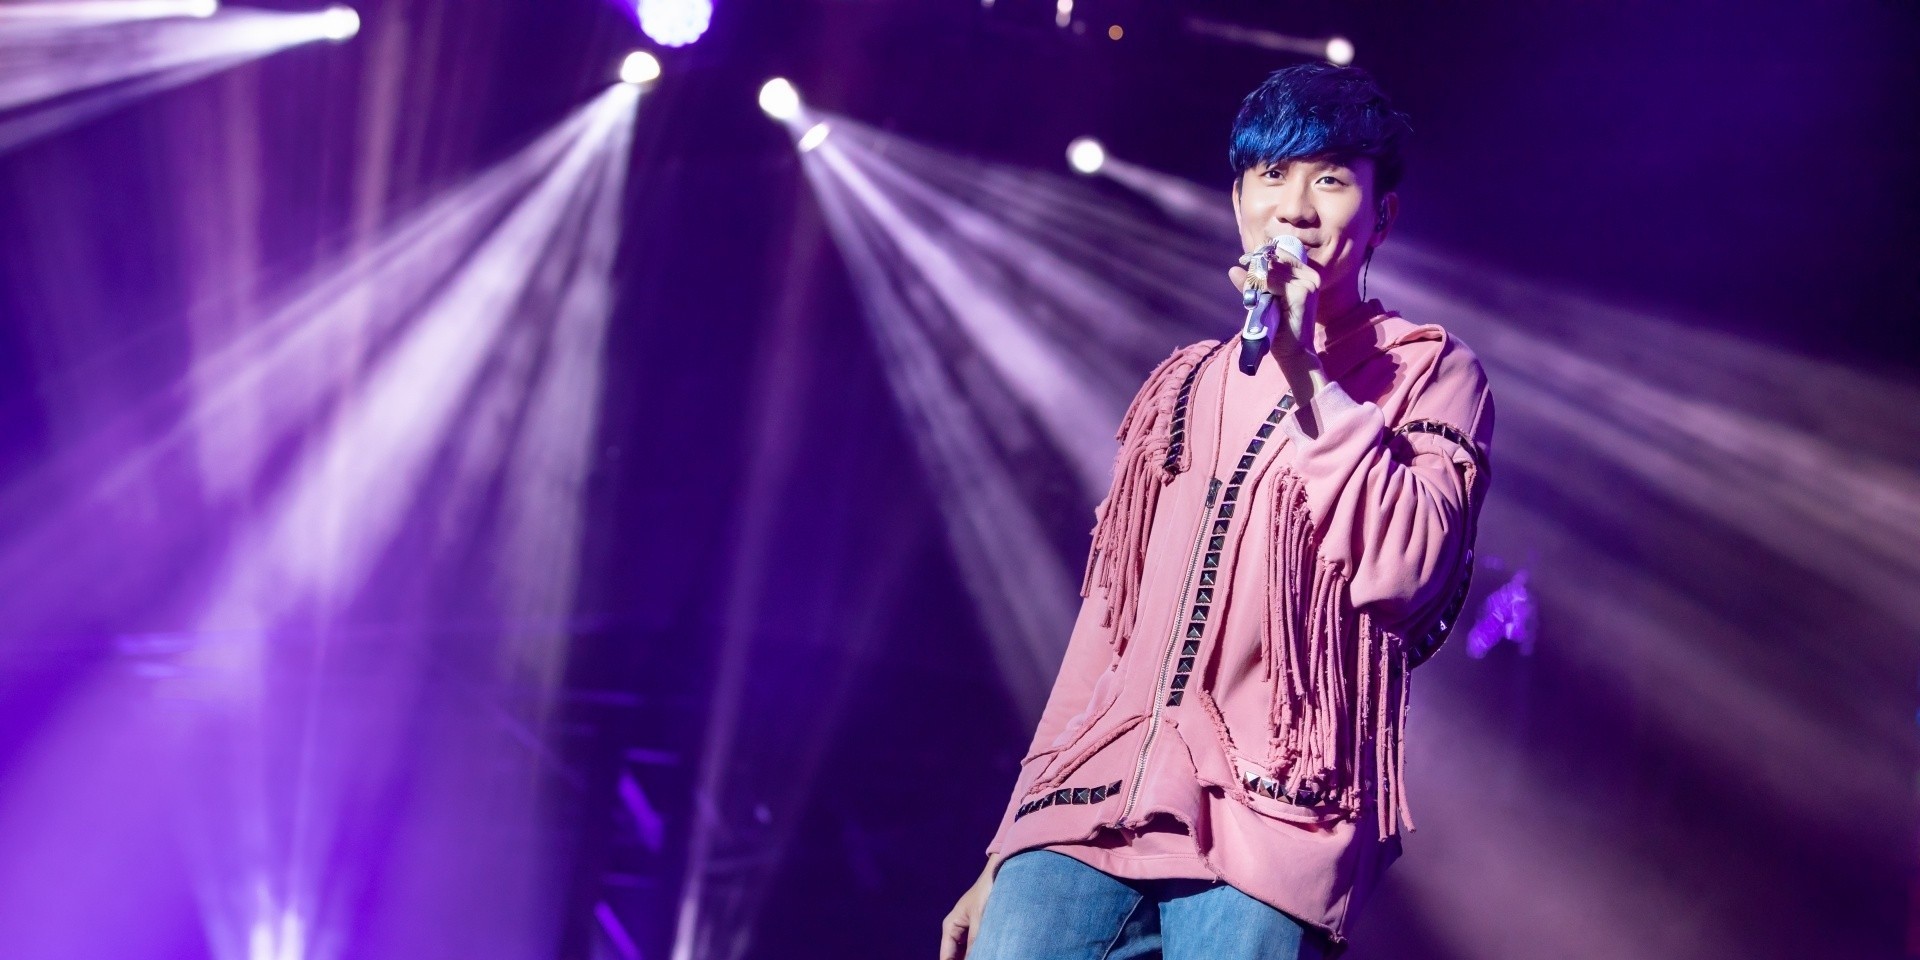 JJ Lin delivers an unforgettable performance at his Sanctuary World Tour - gig report